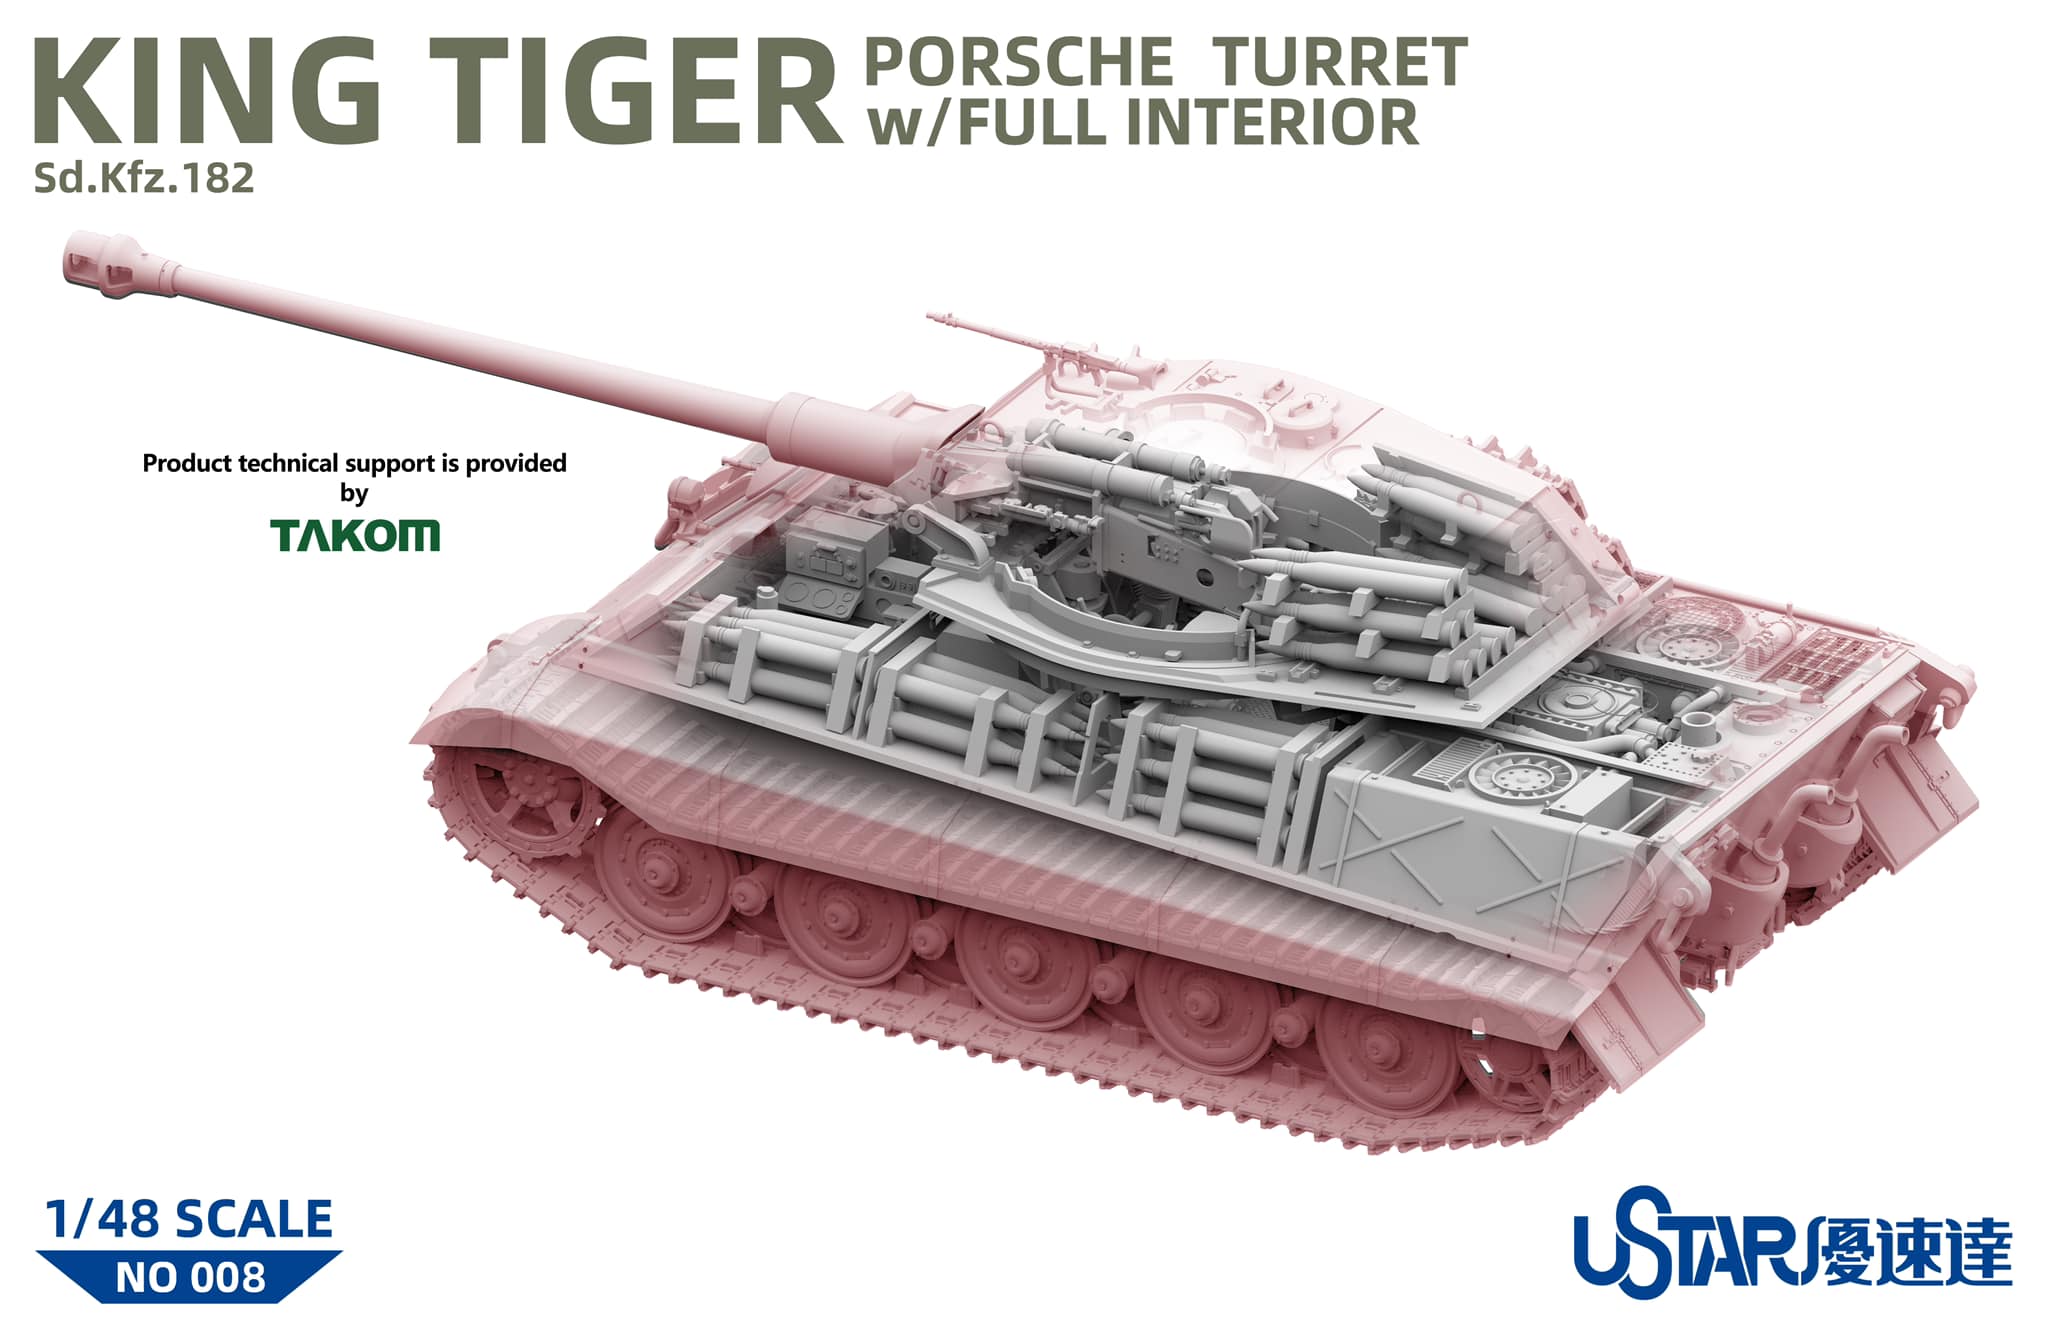 UStar KING TIGER Sd.Kfz. 182 with FULL INTERIOR 1/48 scale model